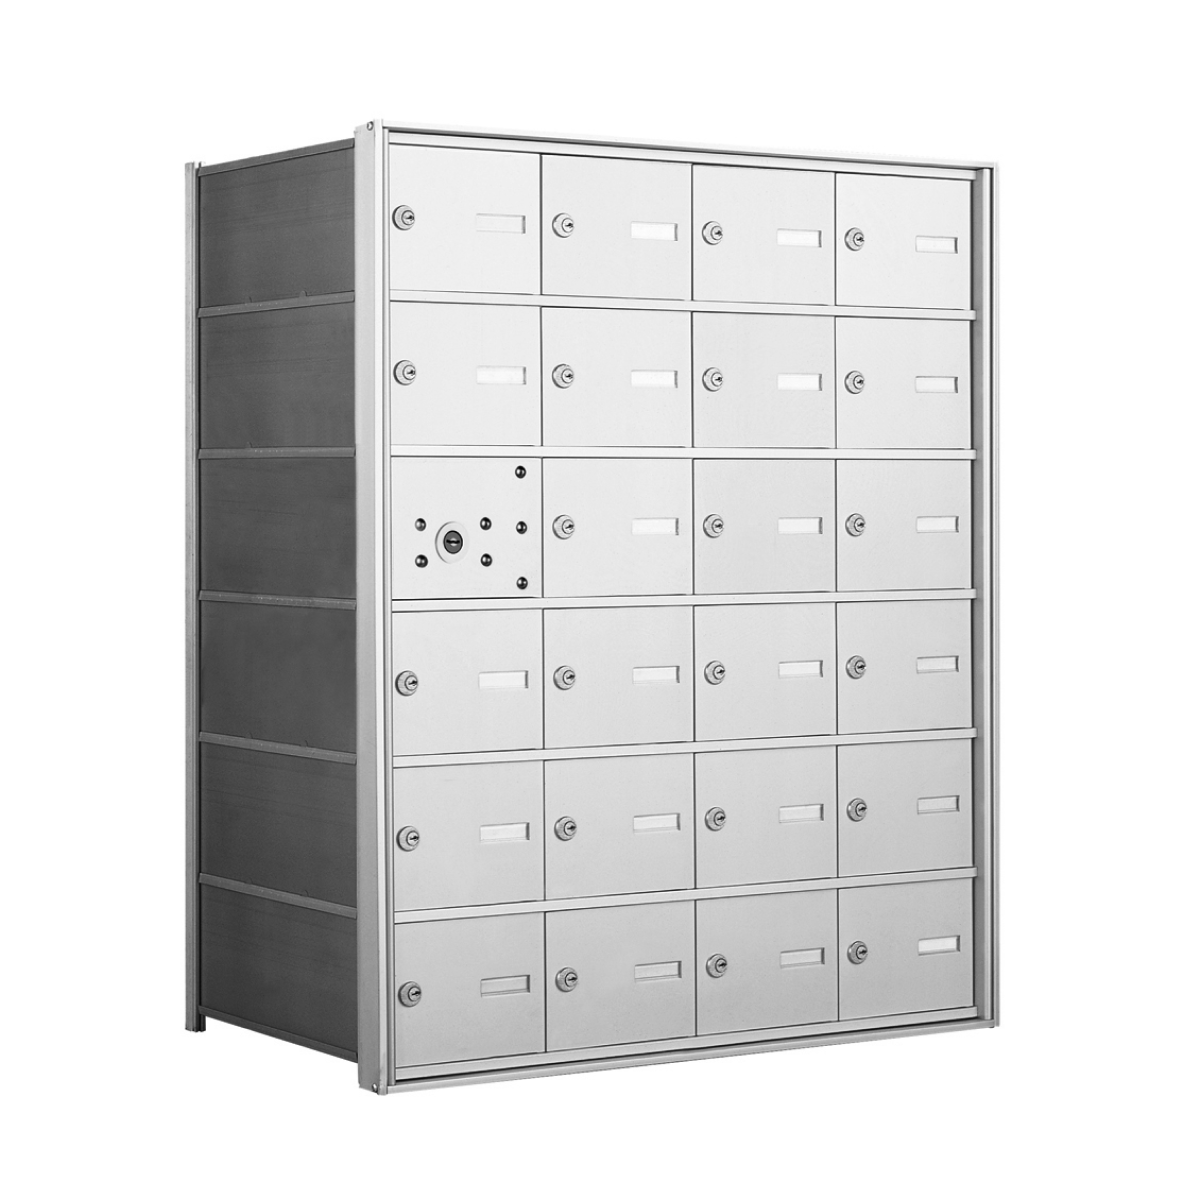 1400 Series Front-Loading Horizontal Mailboxes in Anodized Aluminum Finish – 23 Tenant Doors And 1 USPS Master Door Product Image